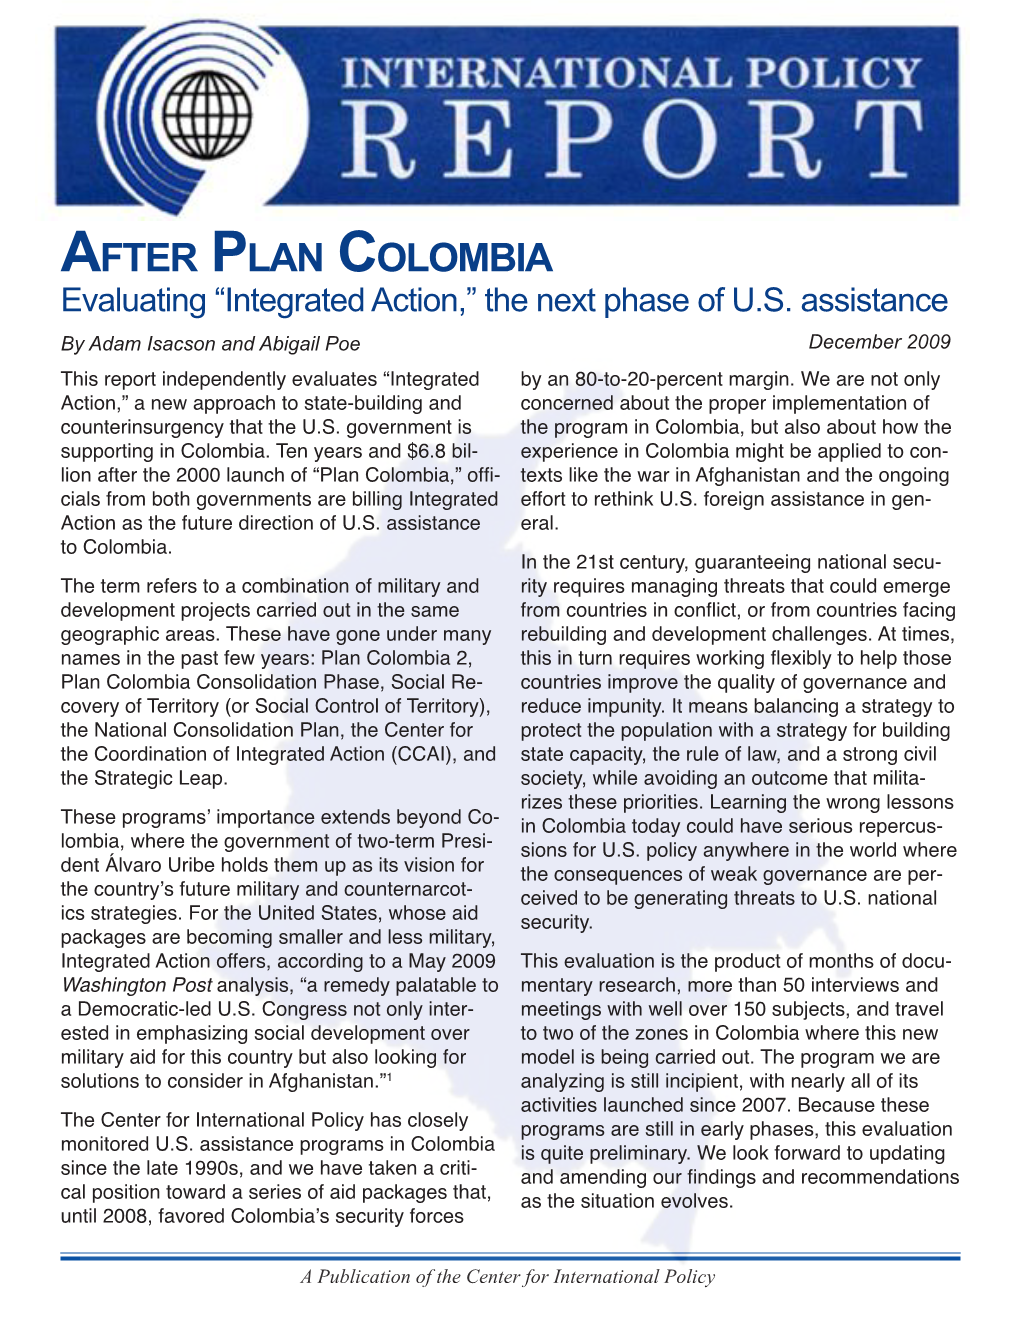 AFTER PLAN COLOMBIA Evaluating “Integrated Action,” the Next Phase of U.S